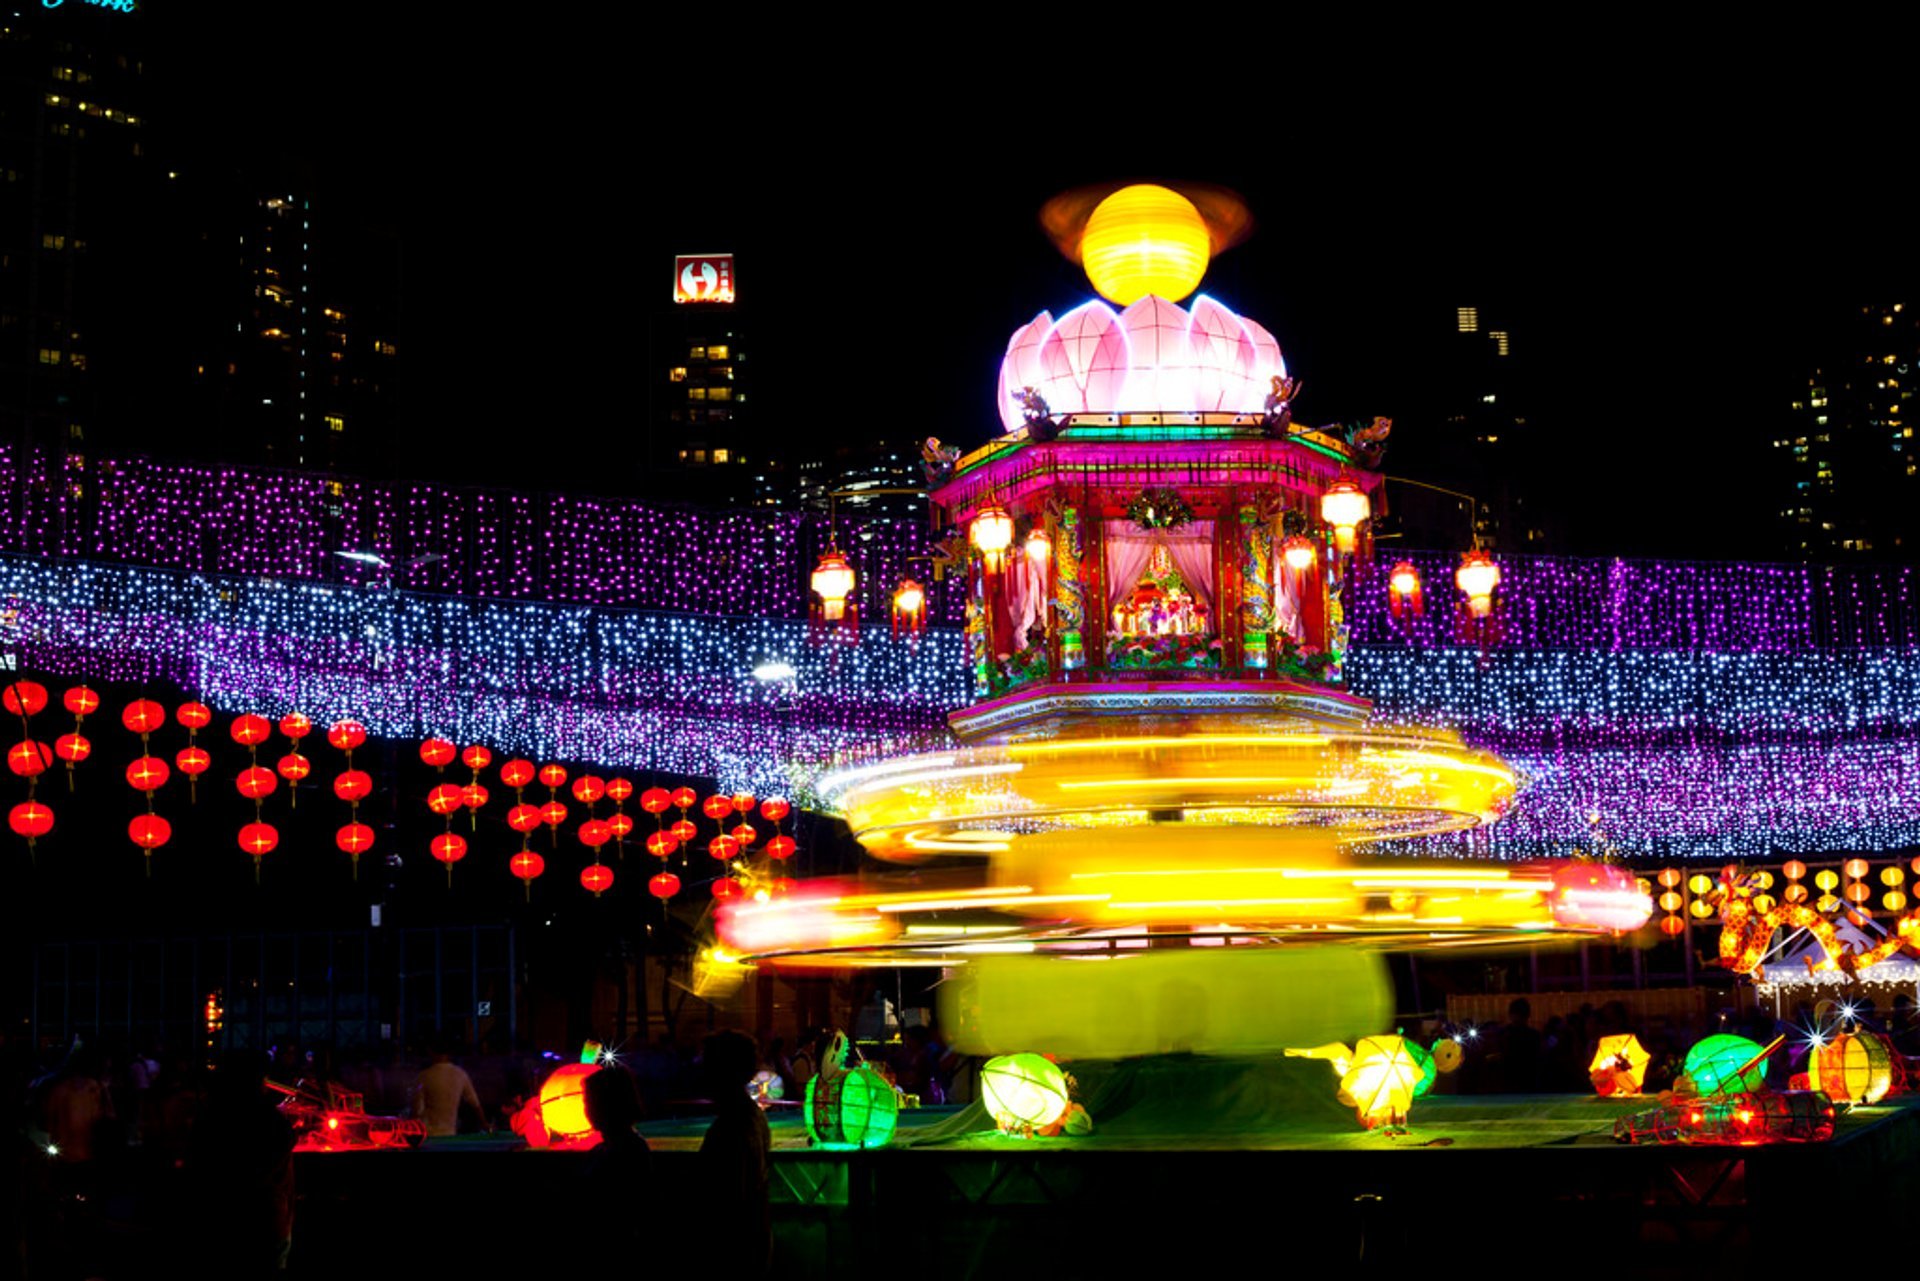 Mid-Autumn Festival 2020 in China - Dates1920 x 1281